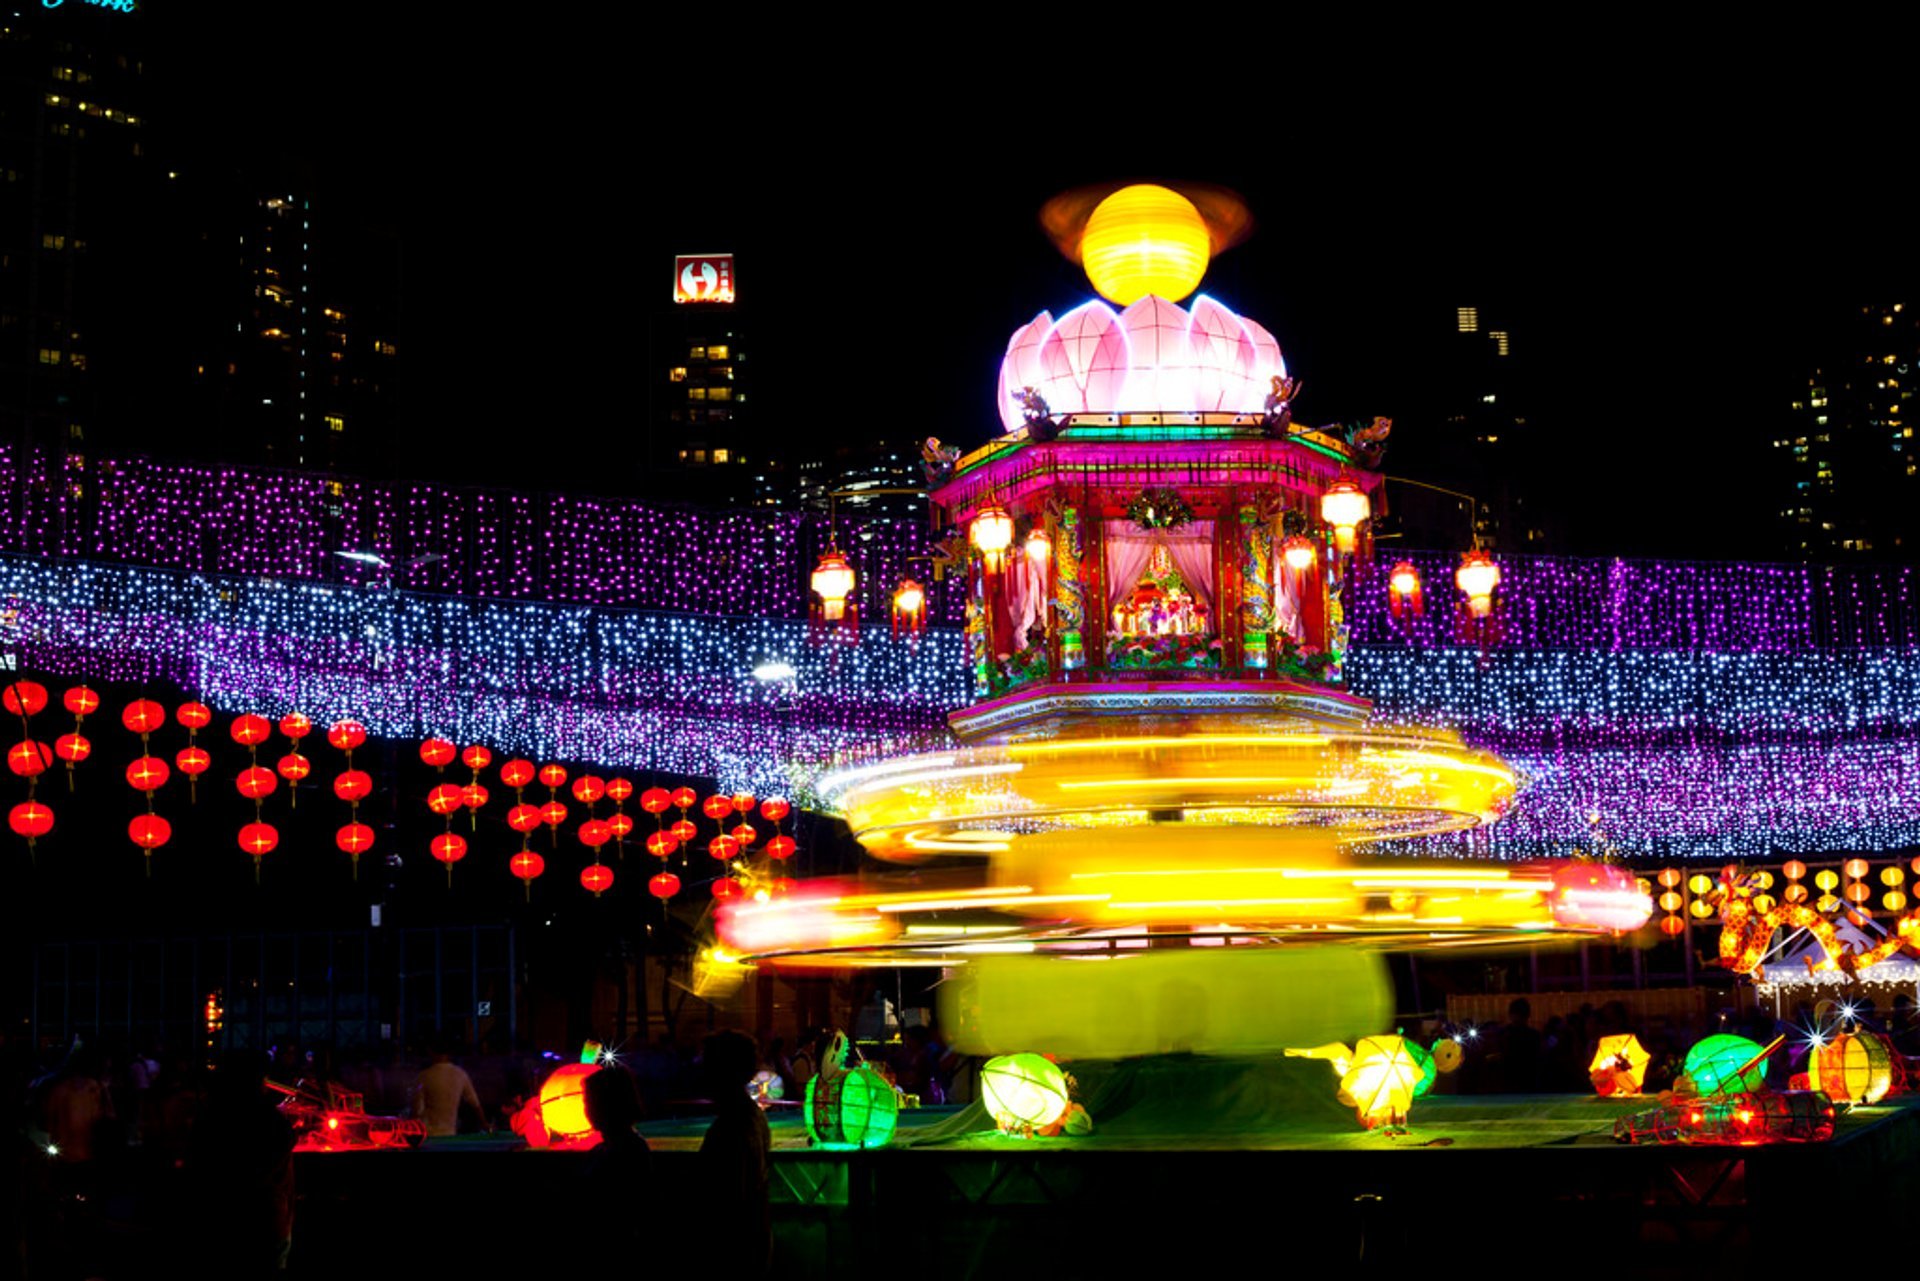 Mid-Autumn Festival 2020 in China - Dates1920 x 1281